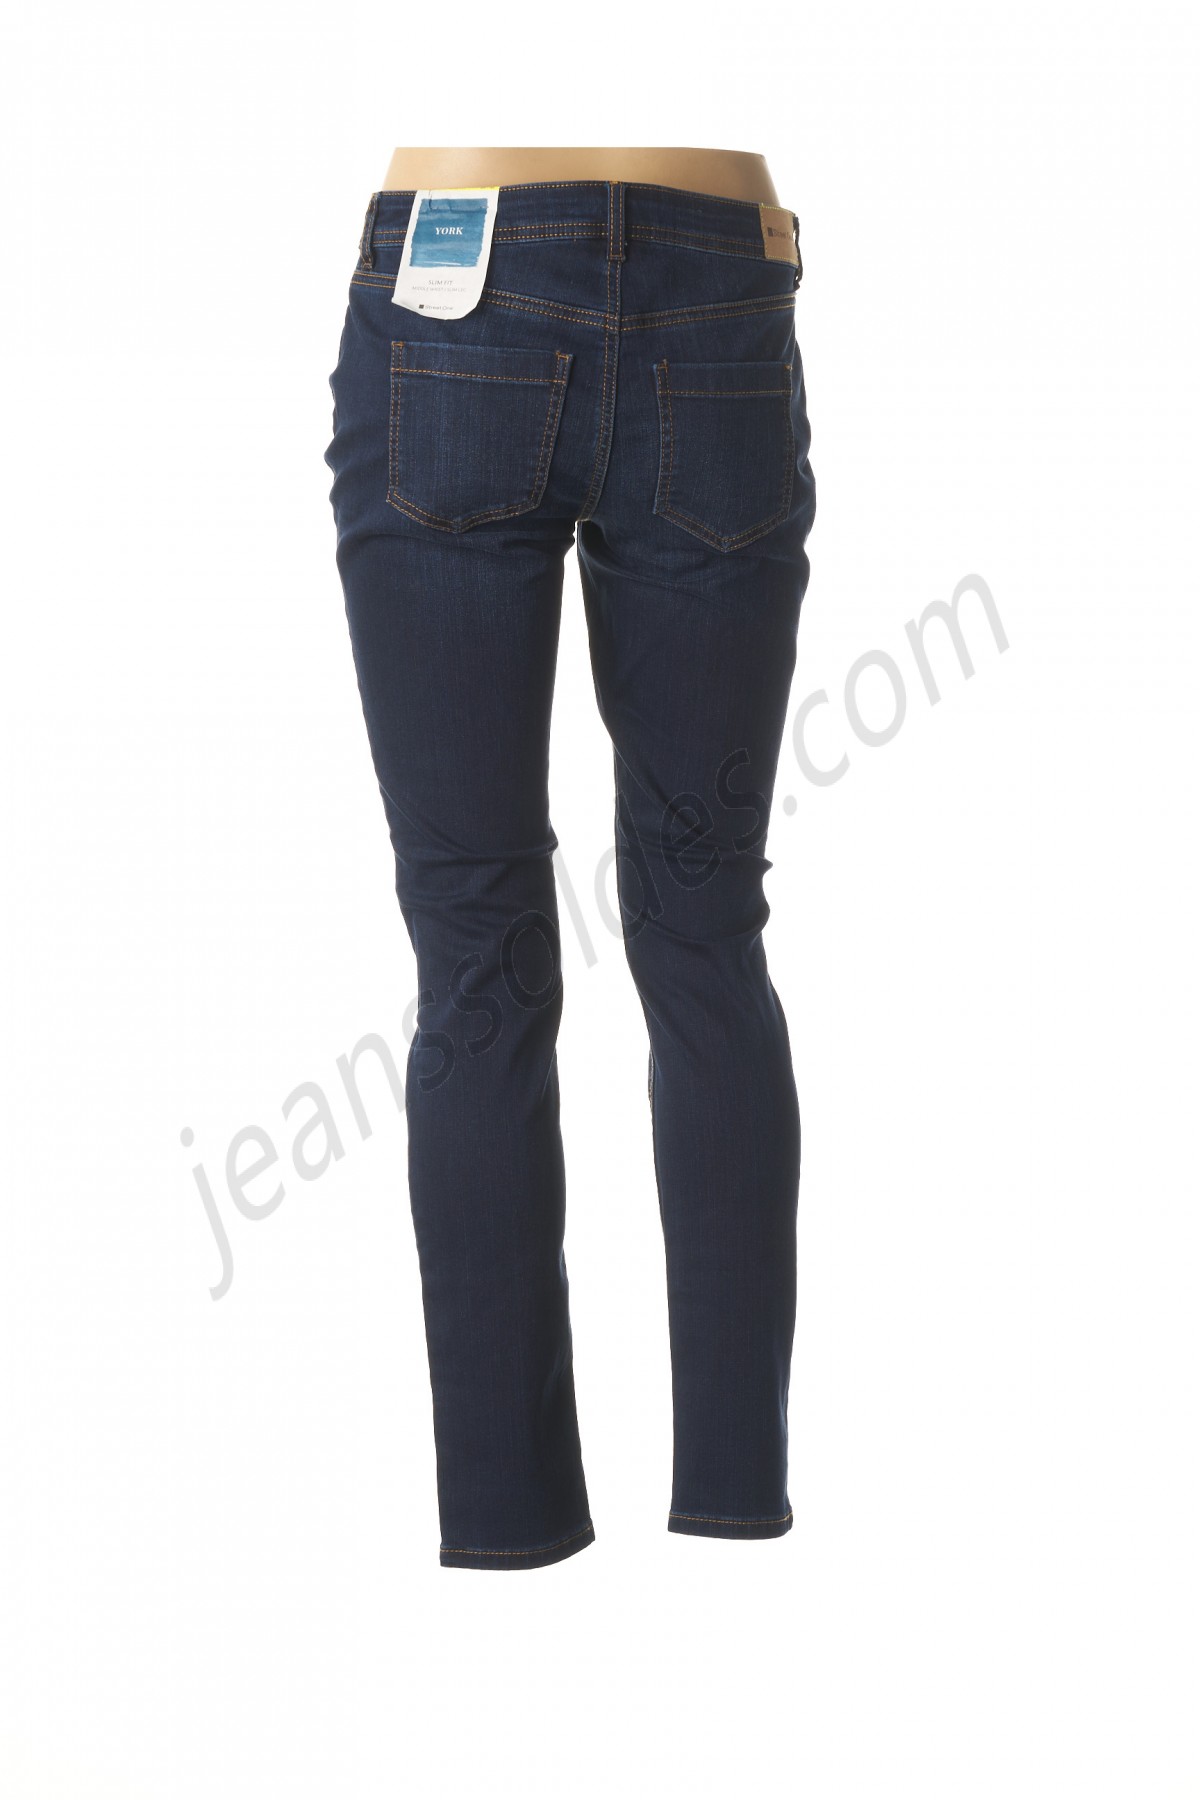 street one-Jeans coupe slim prix d’amis - -1